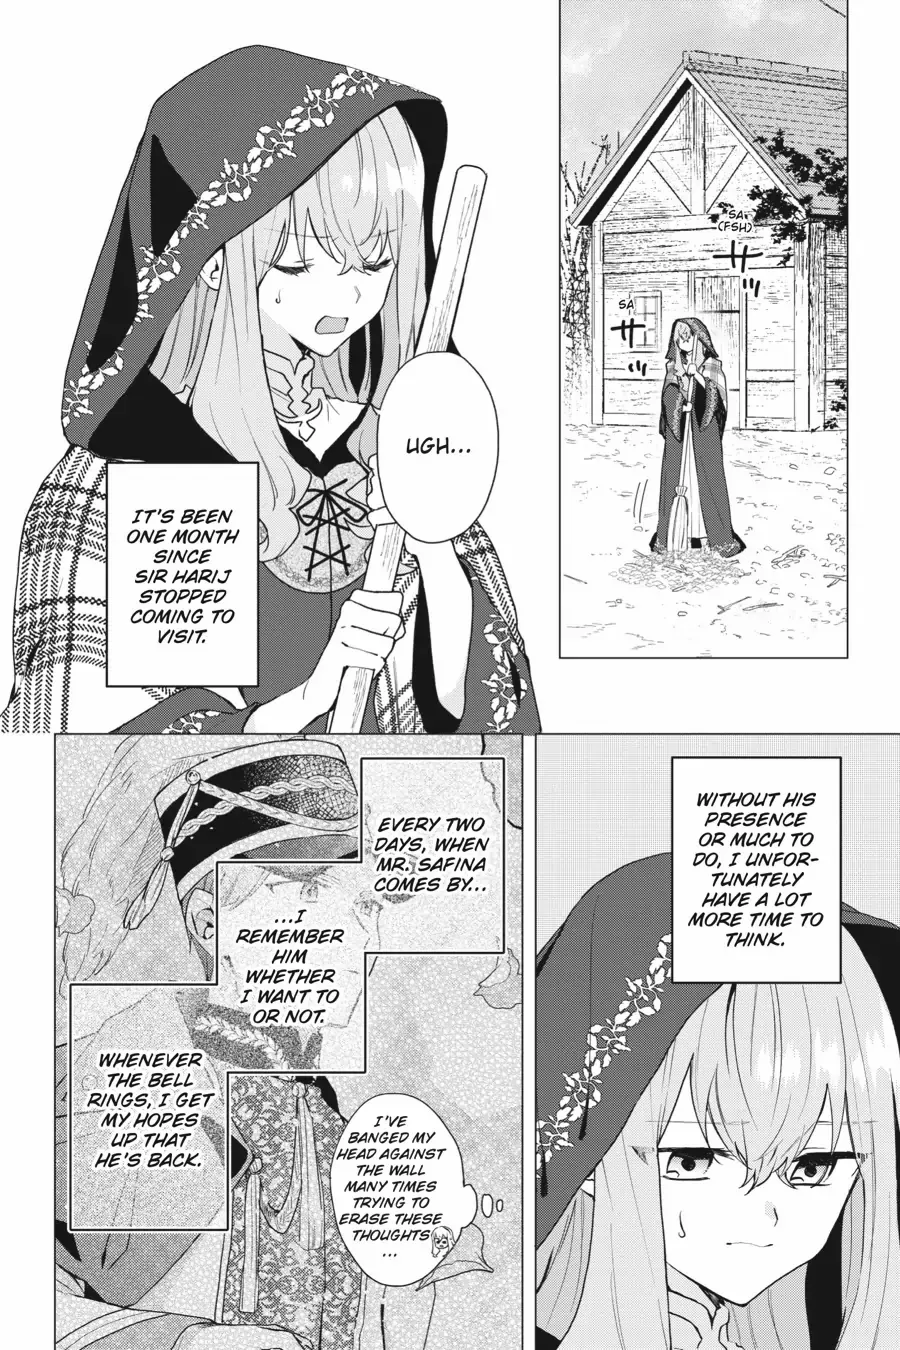 Hello, I Am A Witch, And My Crush Wants Me To Make A Love Potion! - Page 3